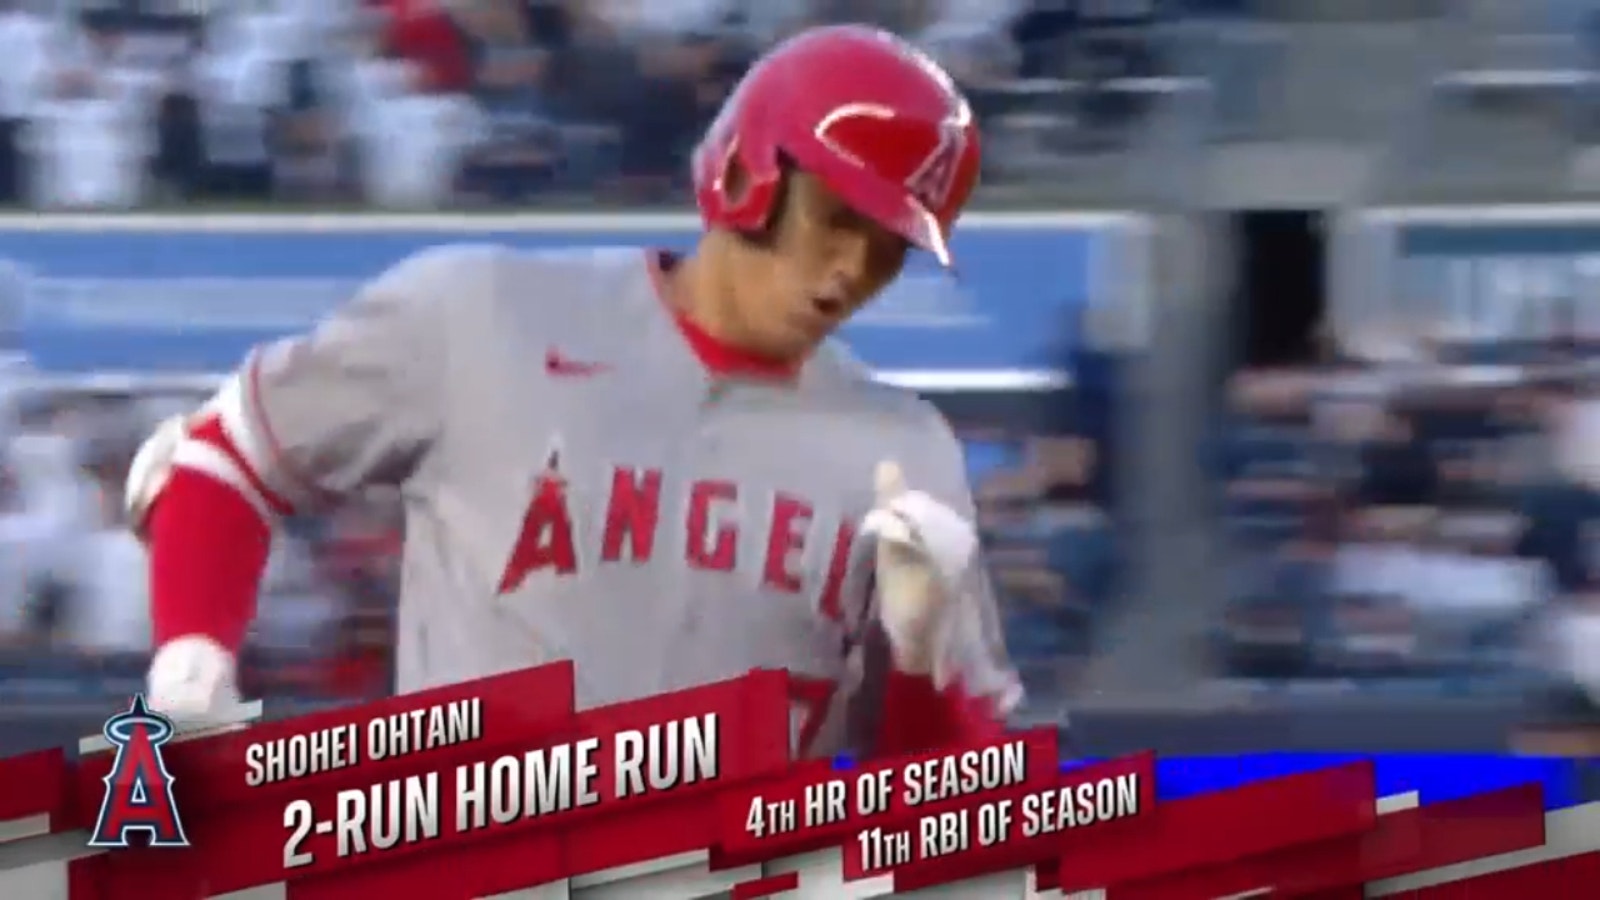 Shohei Ohtani hits a two-run homer to right-center field against the Yankees